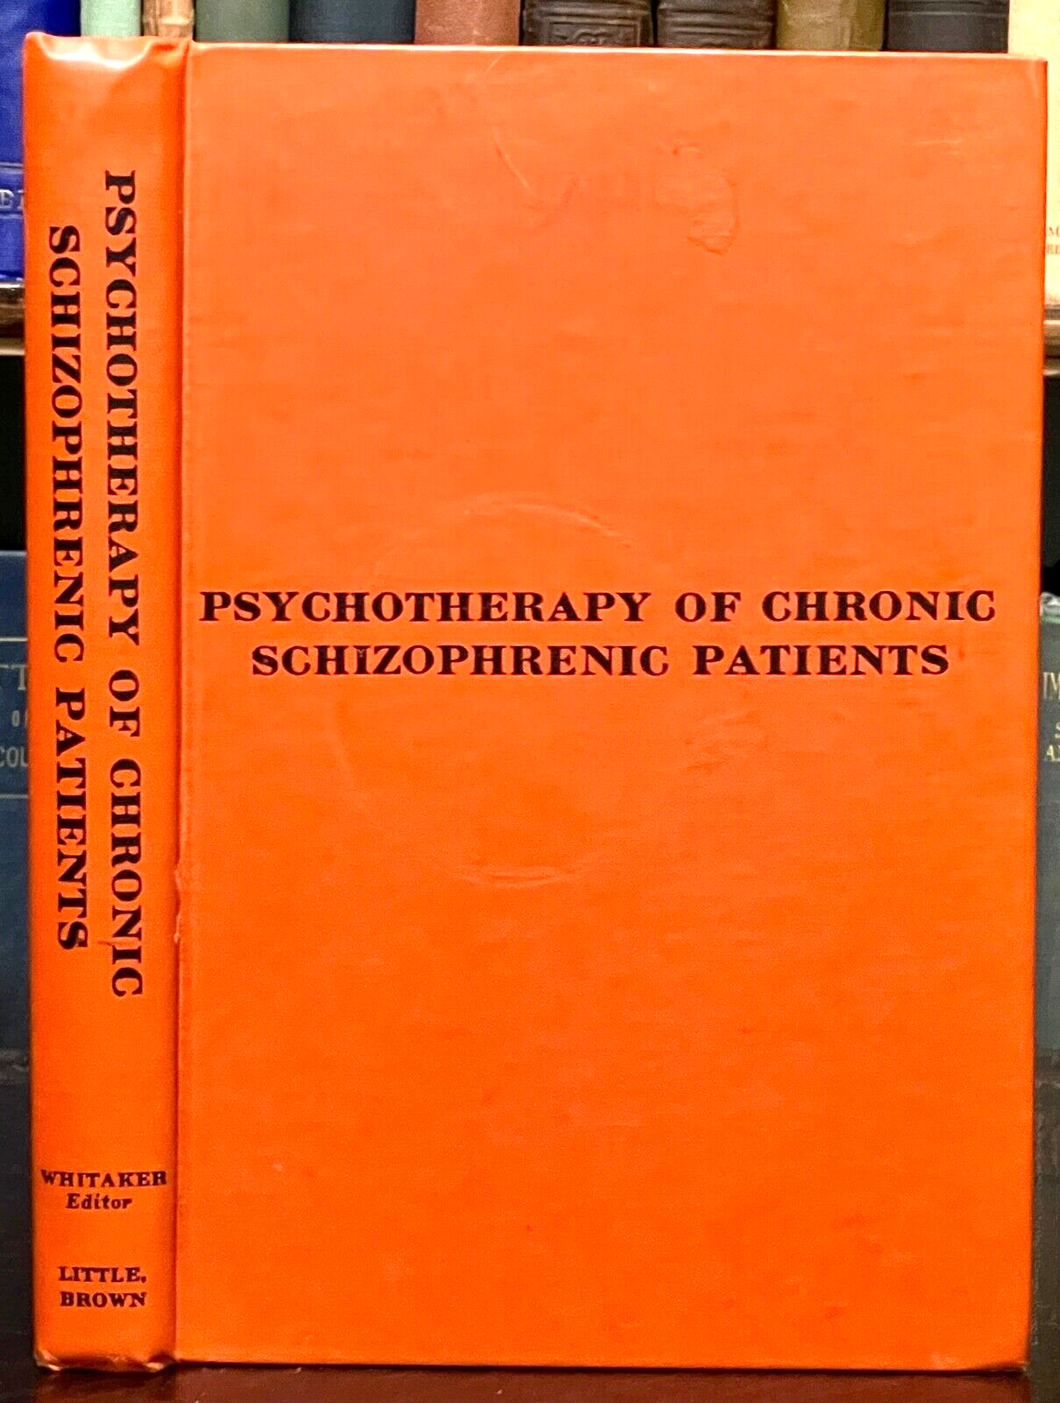 PSYCHOTHERAPY OF CHRONIC SCHIZOPHRENIC PATIENTS - Whitaker, 1st 1958 - THERAPY